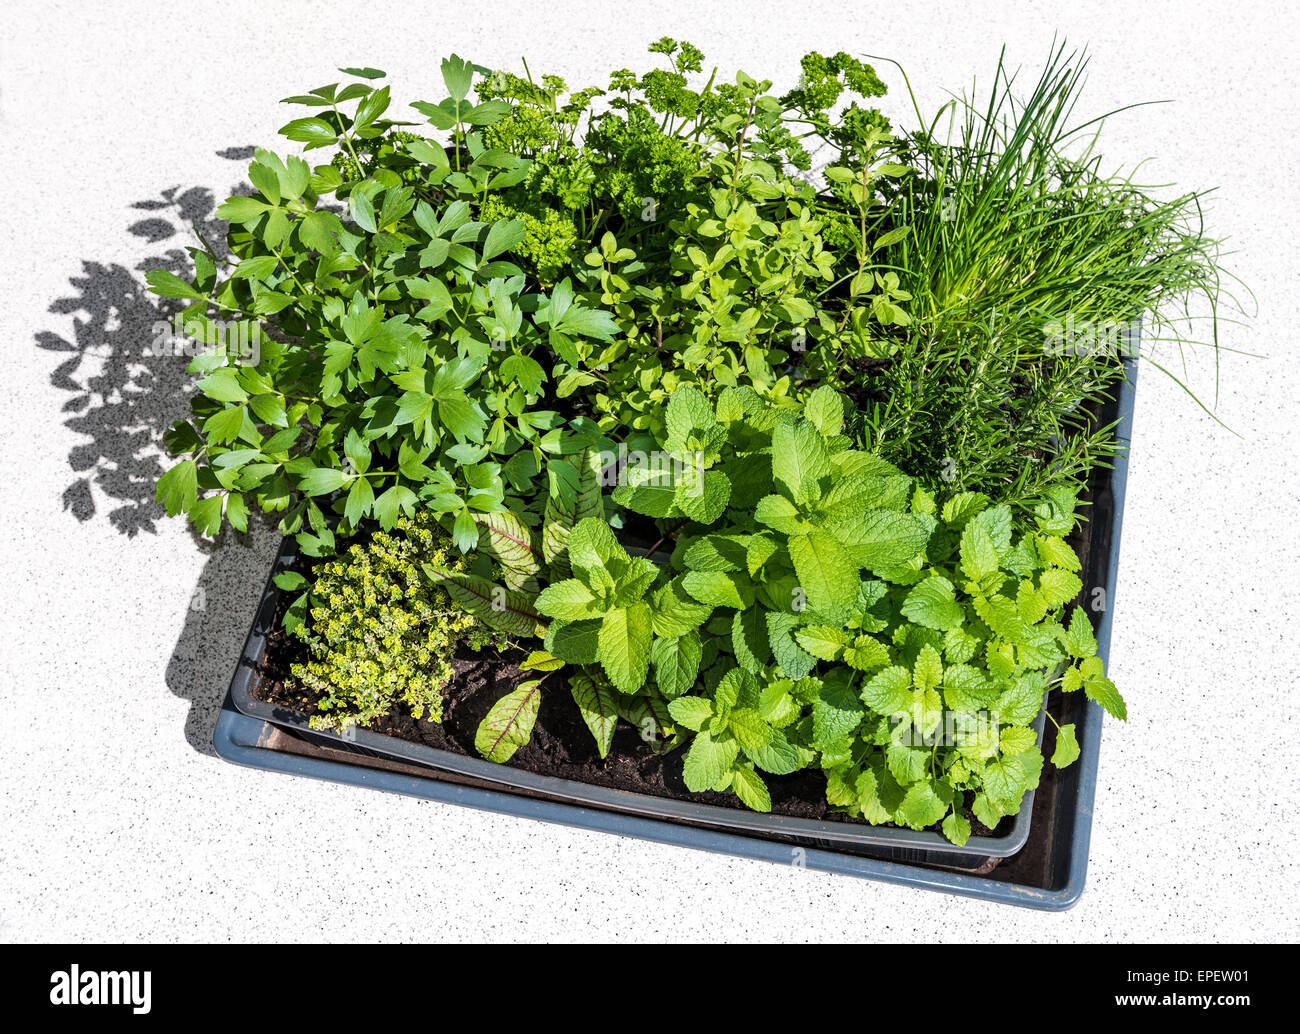 fresh green herbs in containers on balconies rearing growing breed handling in the smallest space parsley chives mint thyme sorr Stock Photo